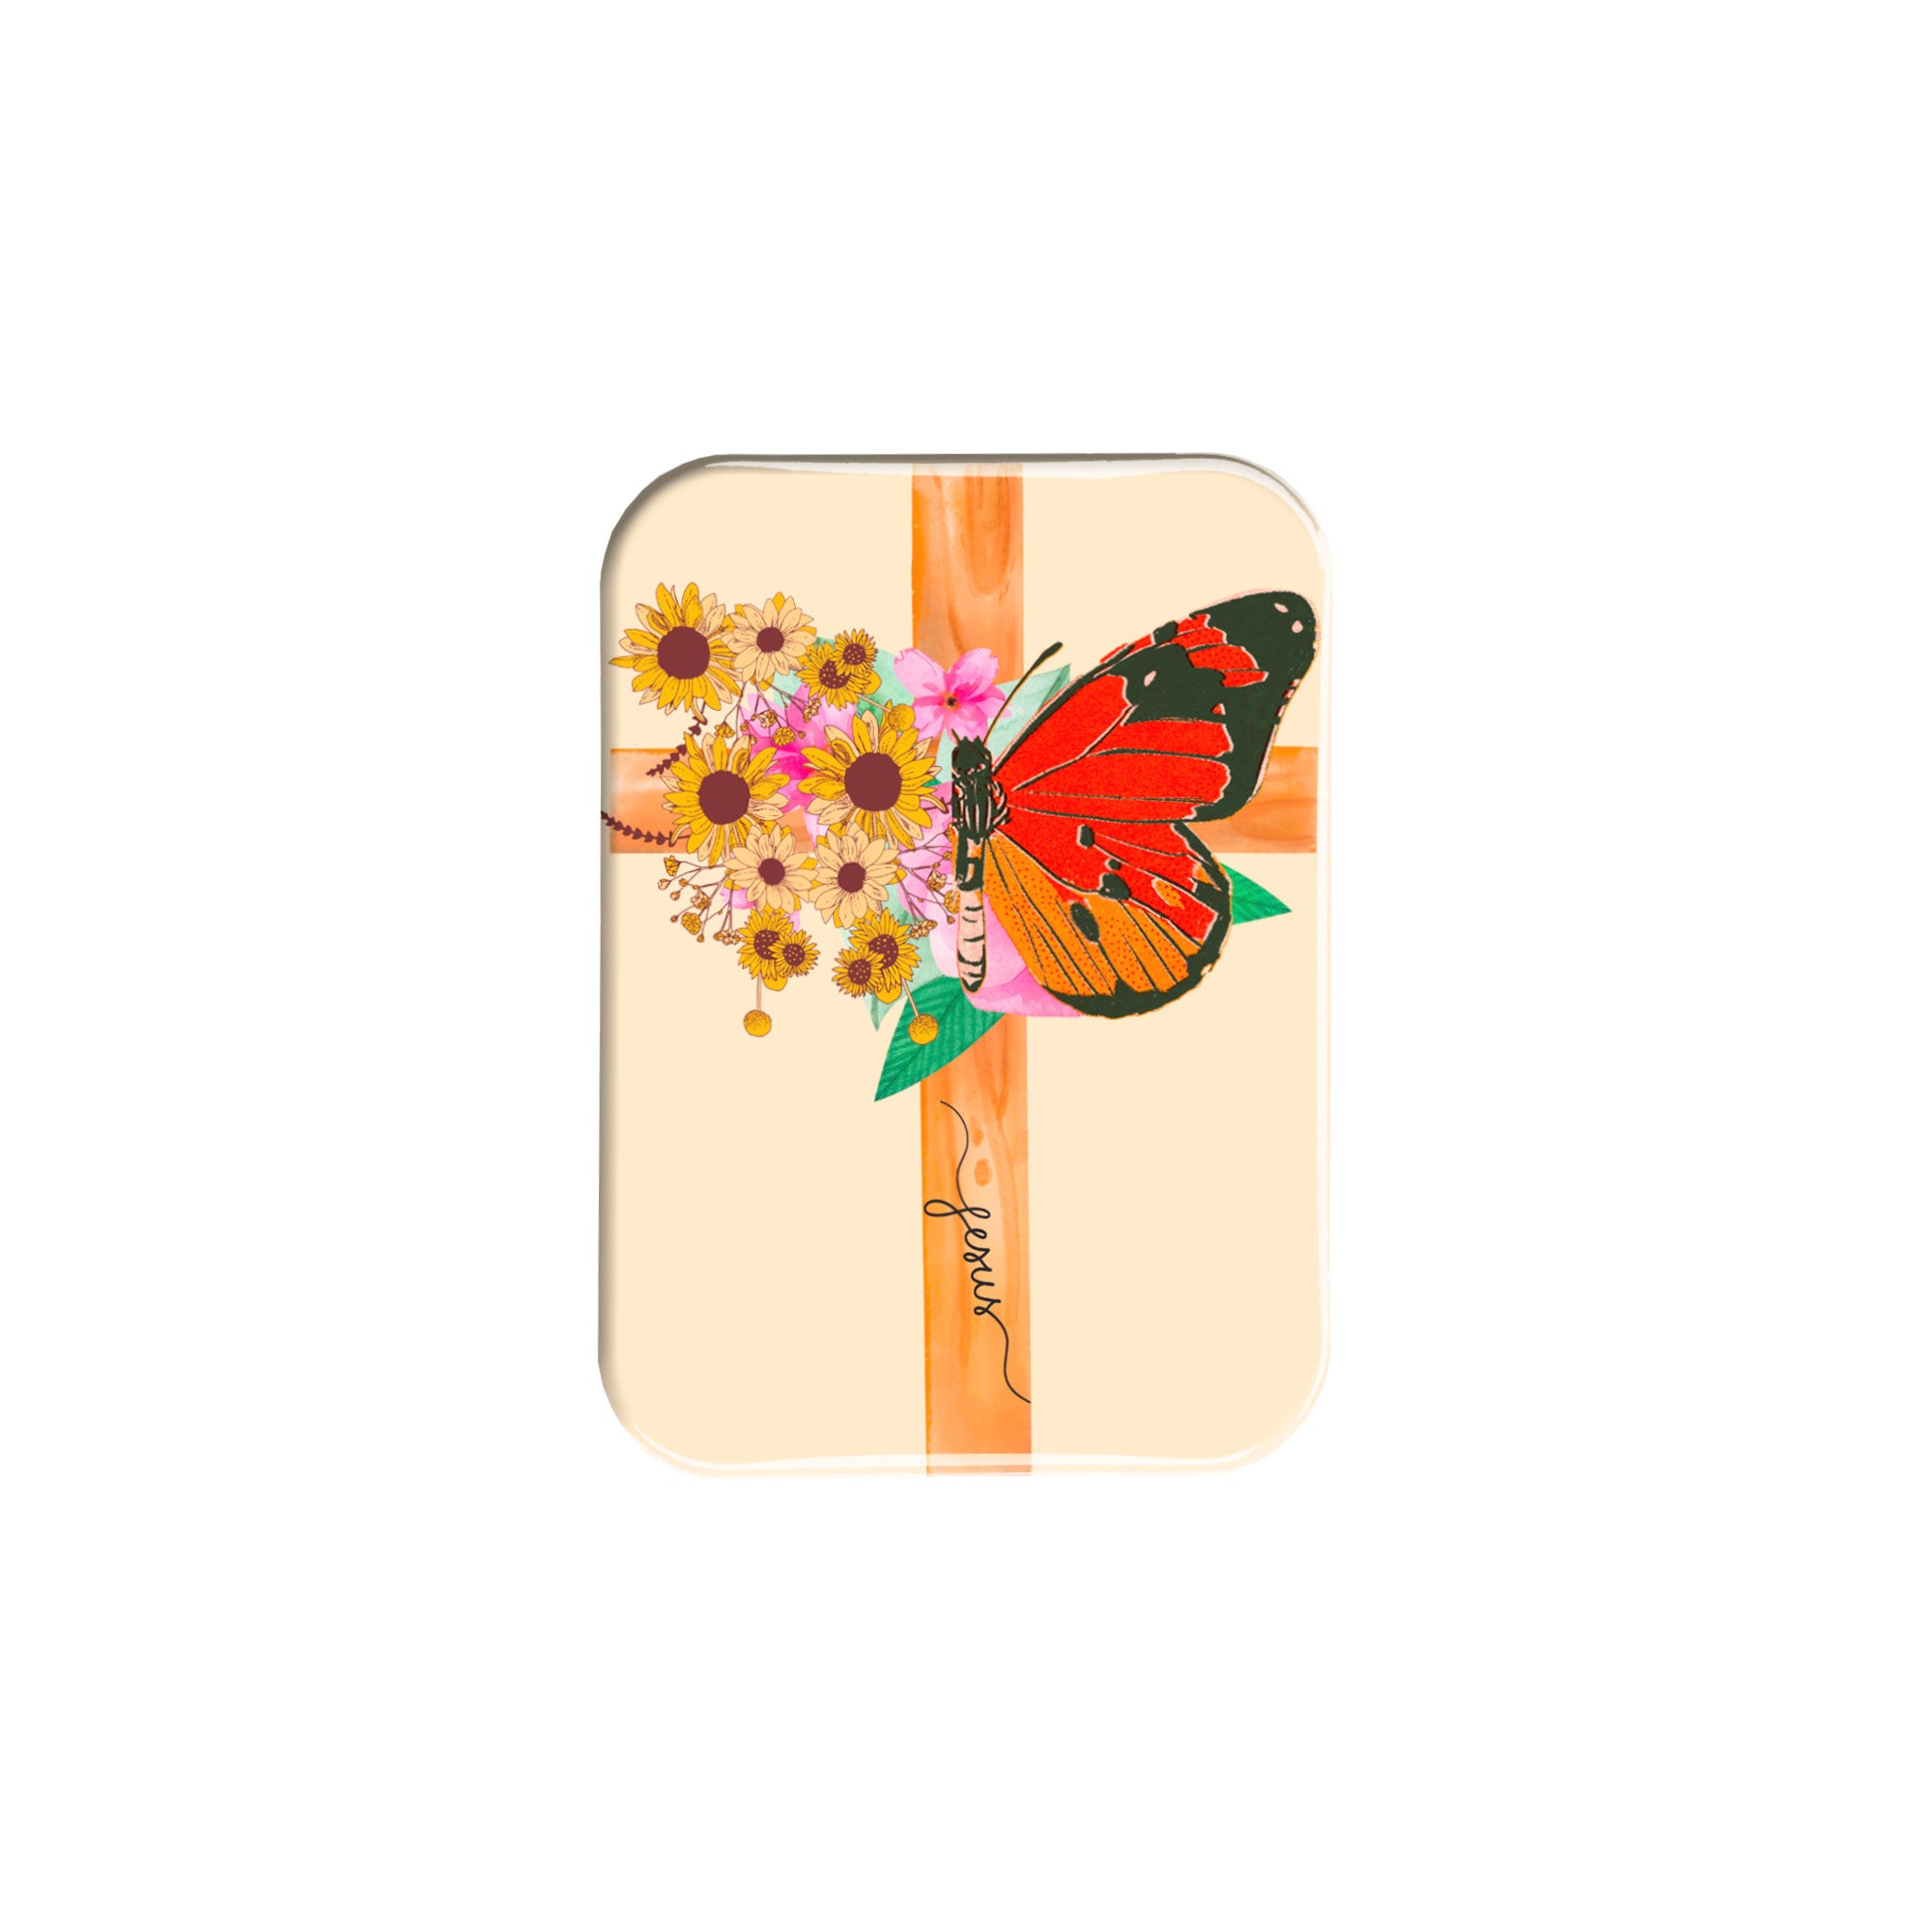 "Butterfly" - 2.5" X 3.5" Rectangle Fridge Magnets